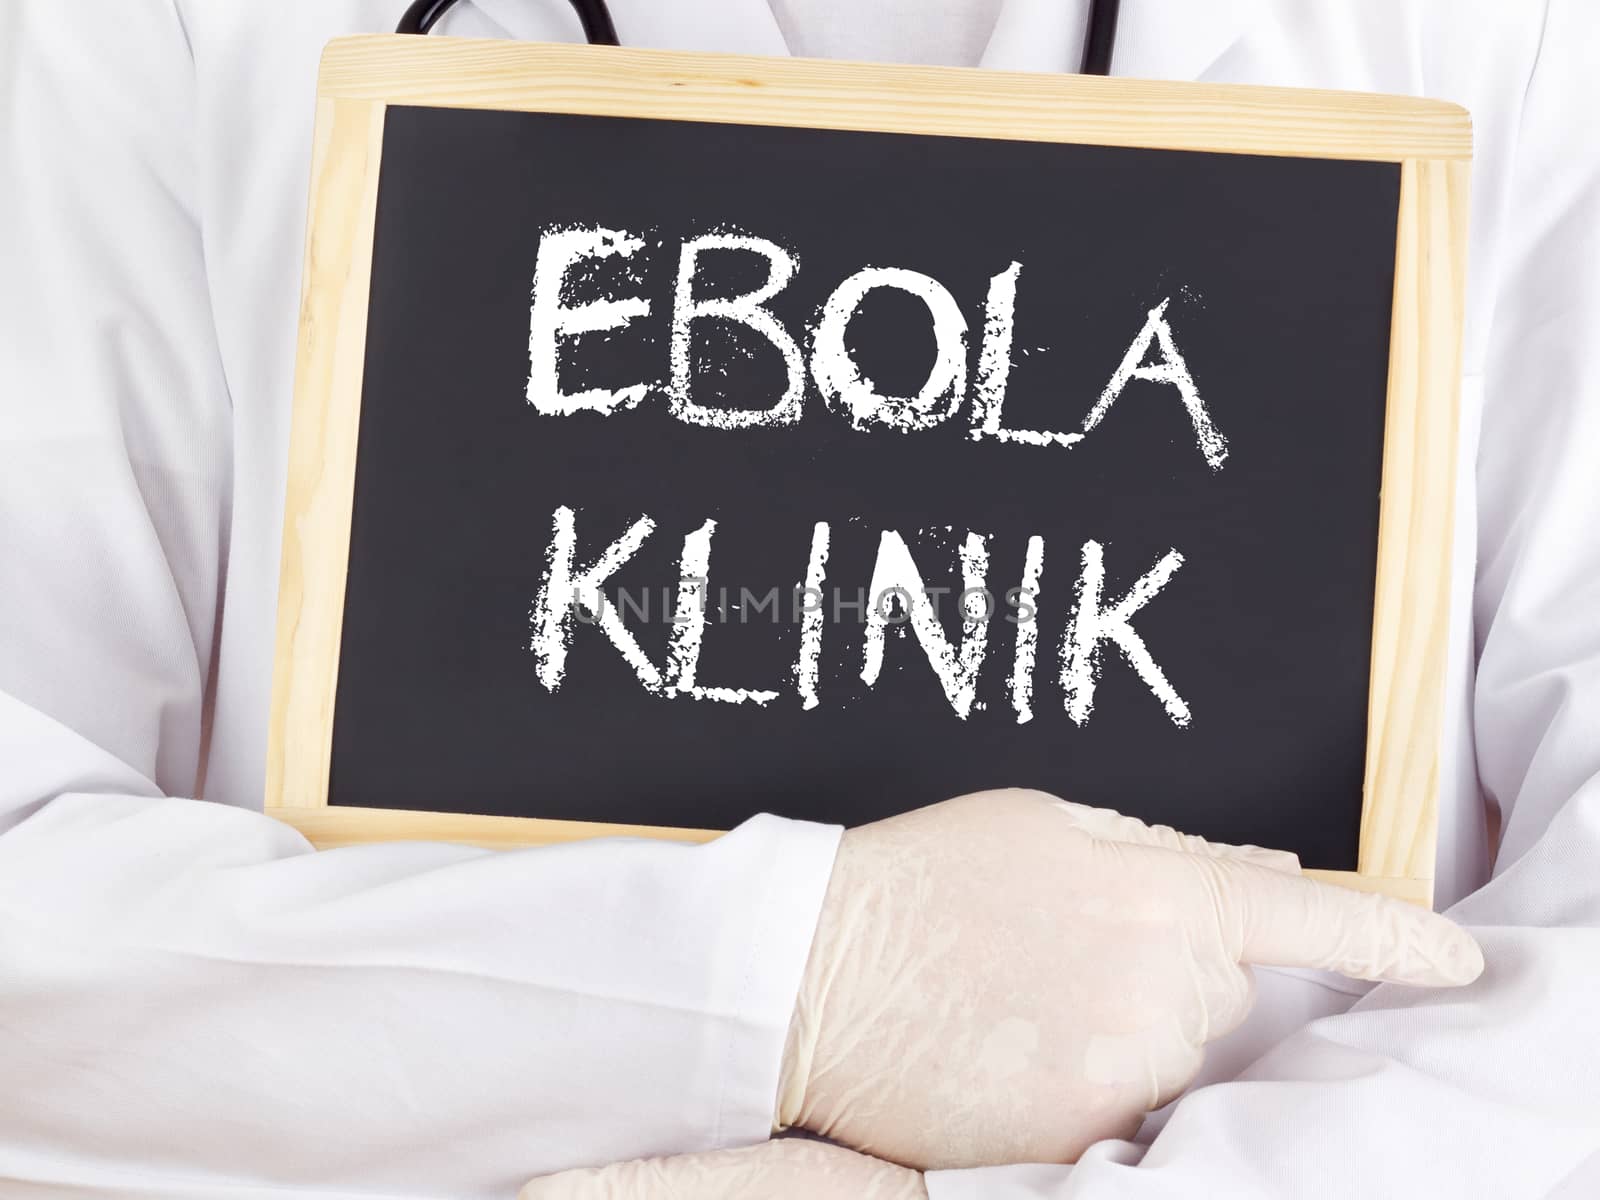 Doctor shows information: Ebola clinic in german language by gwolters